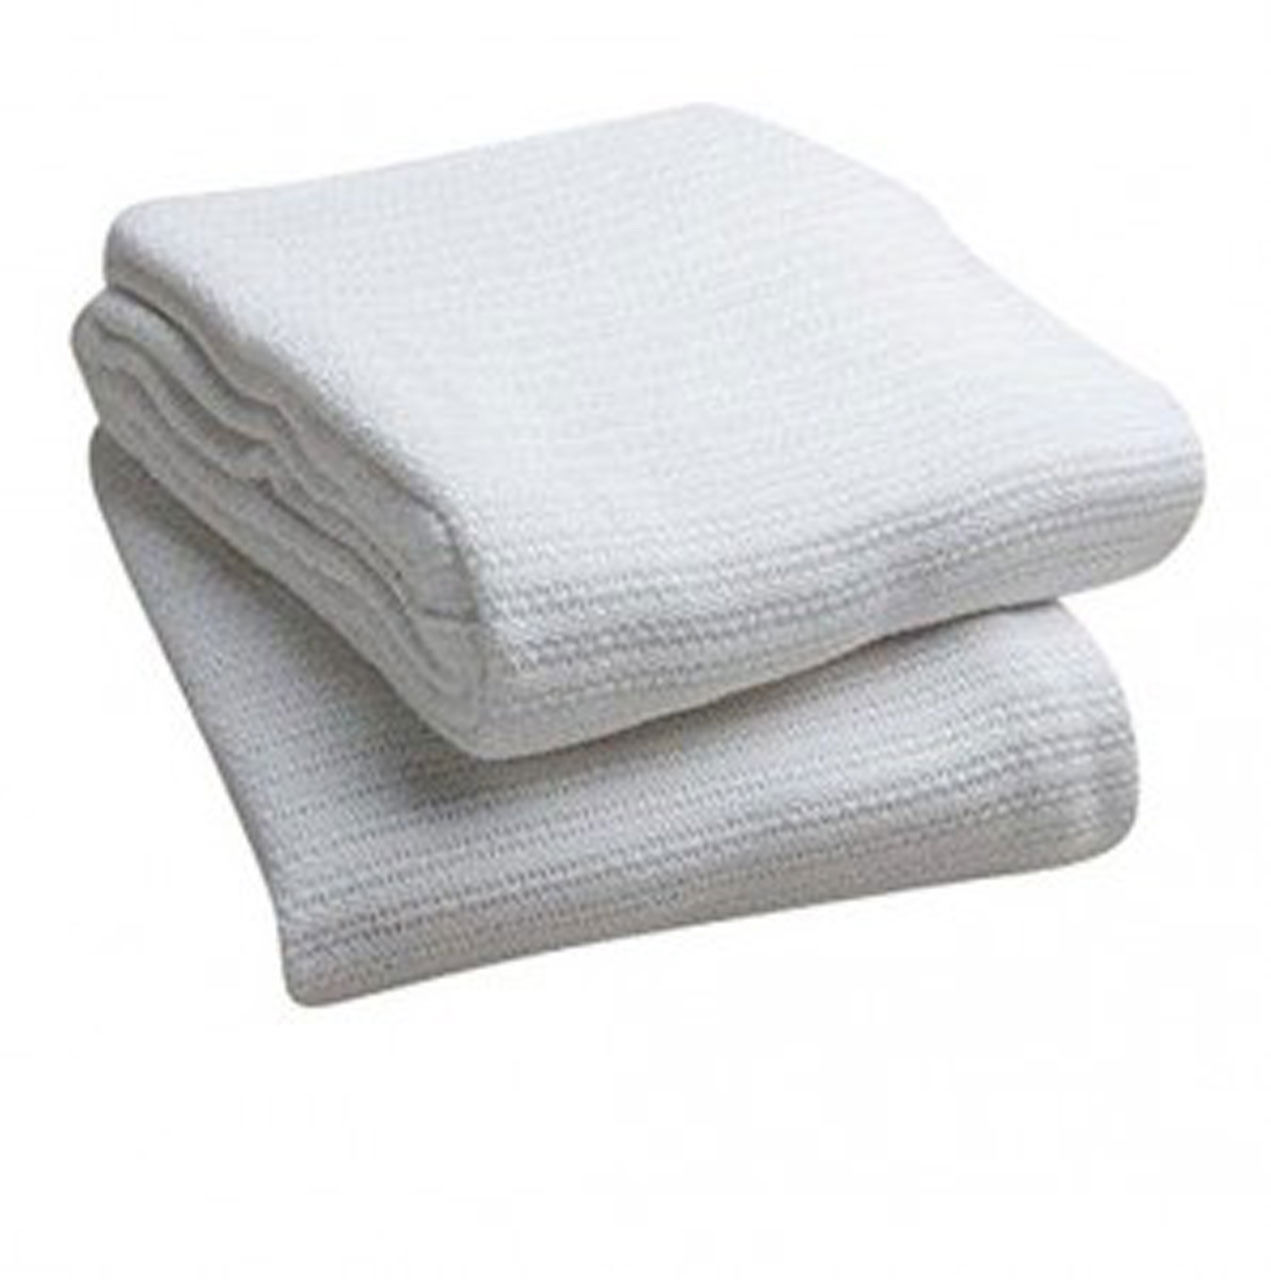 What is the description of the premium white open weave blanket?